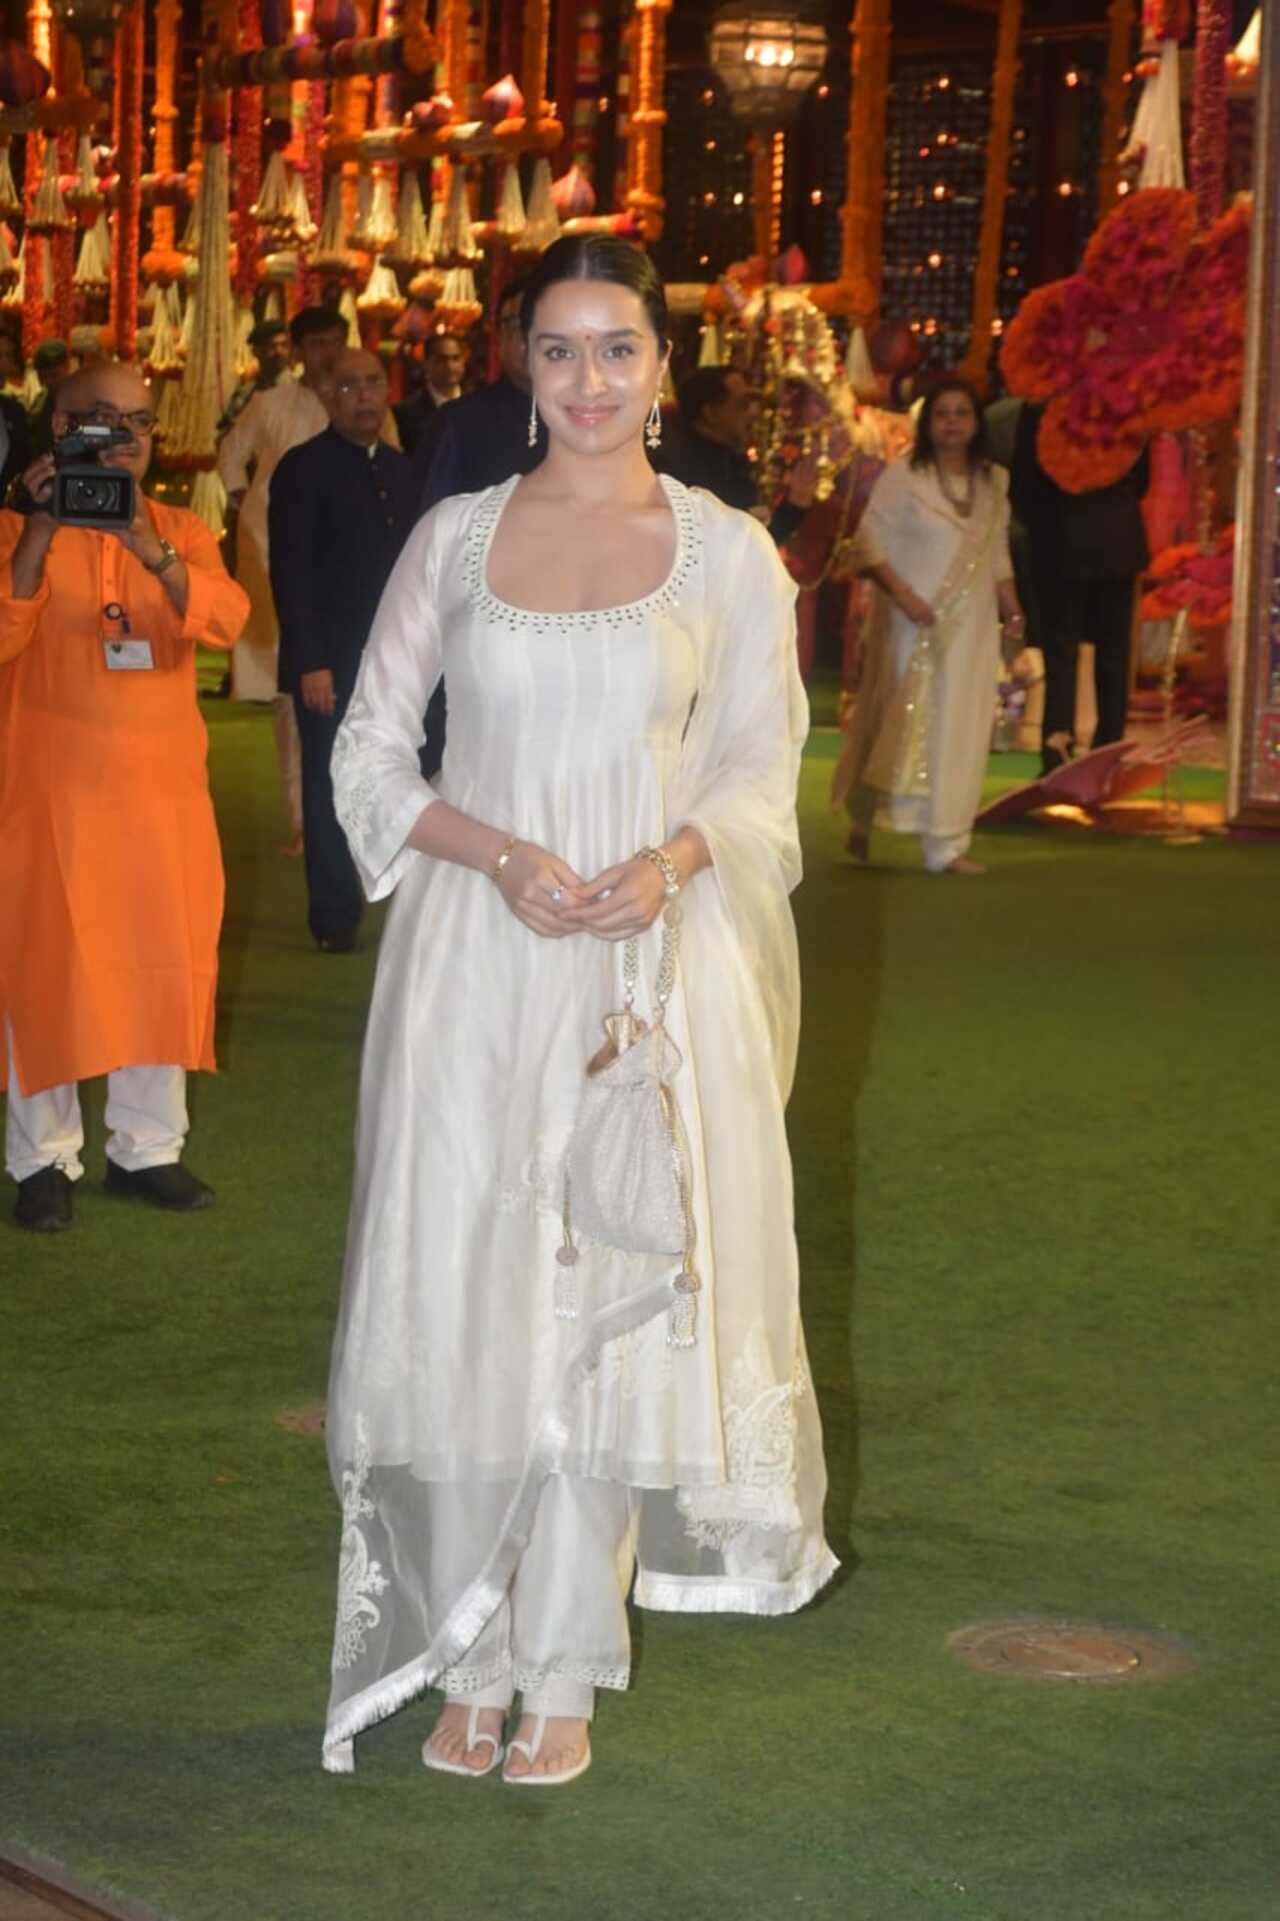 Shraddha Kapoor wore a white churidar for the ceremony last evening